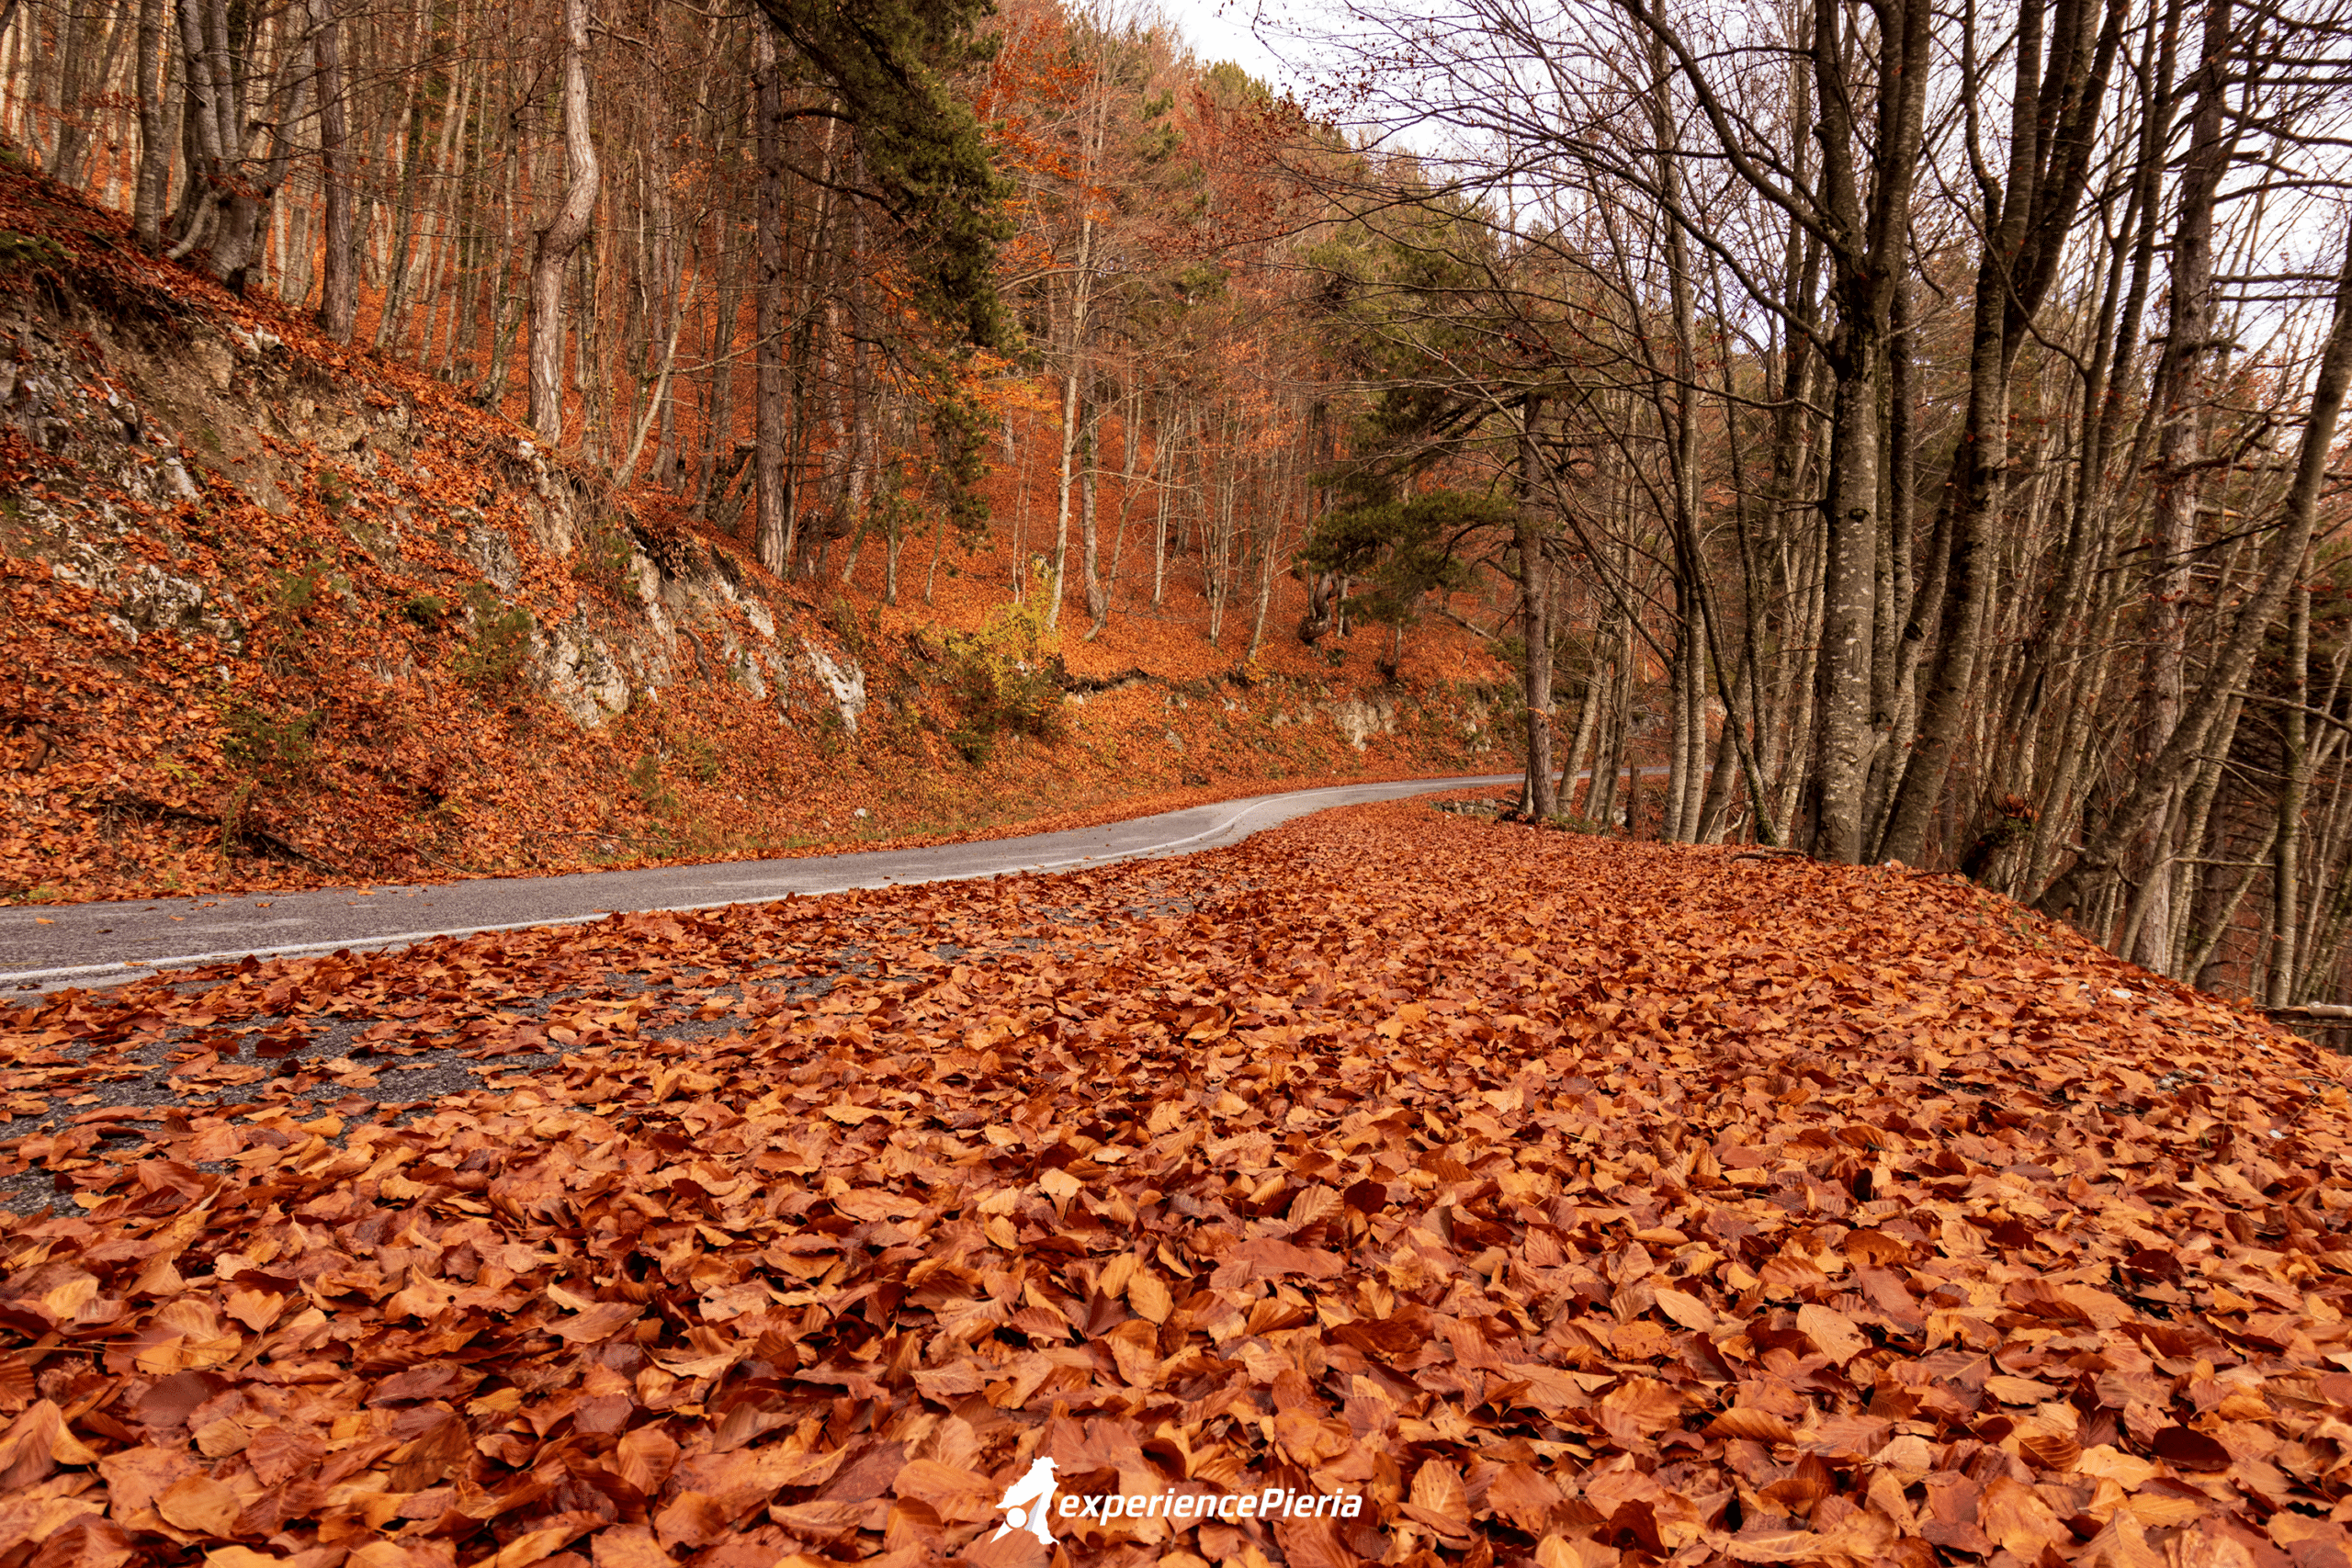 orange leaves fall on the road during autumn in pieria